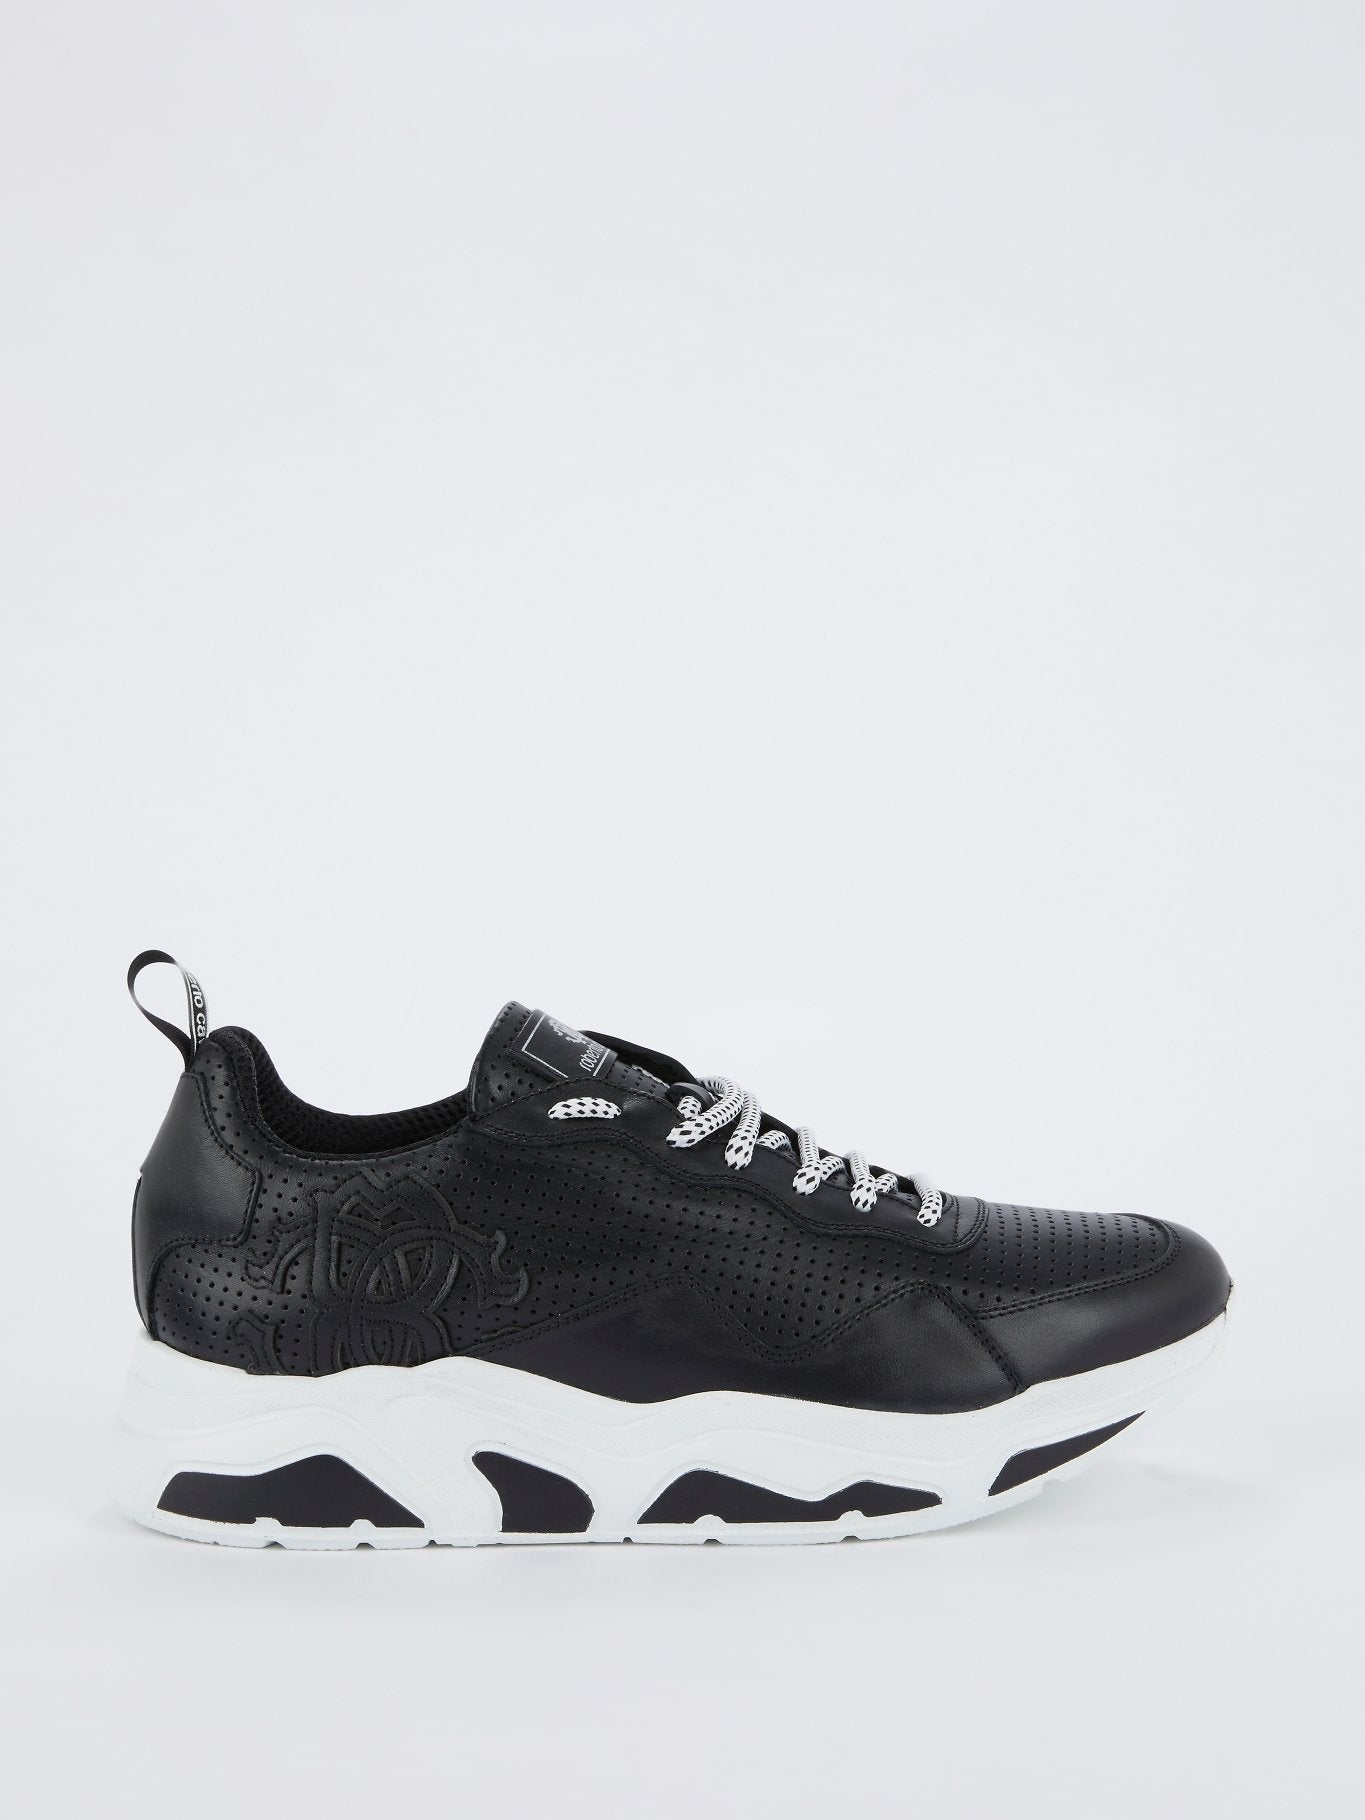 Black Perforated Leather Sneakers